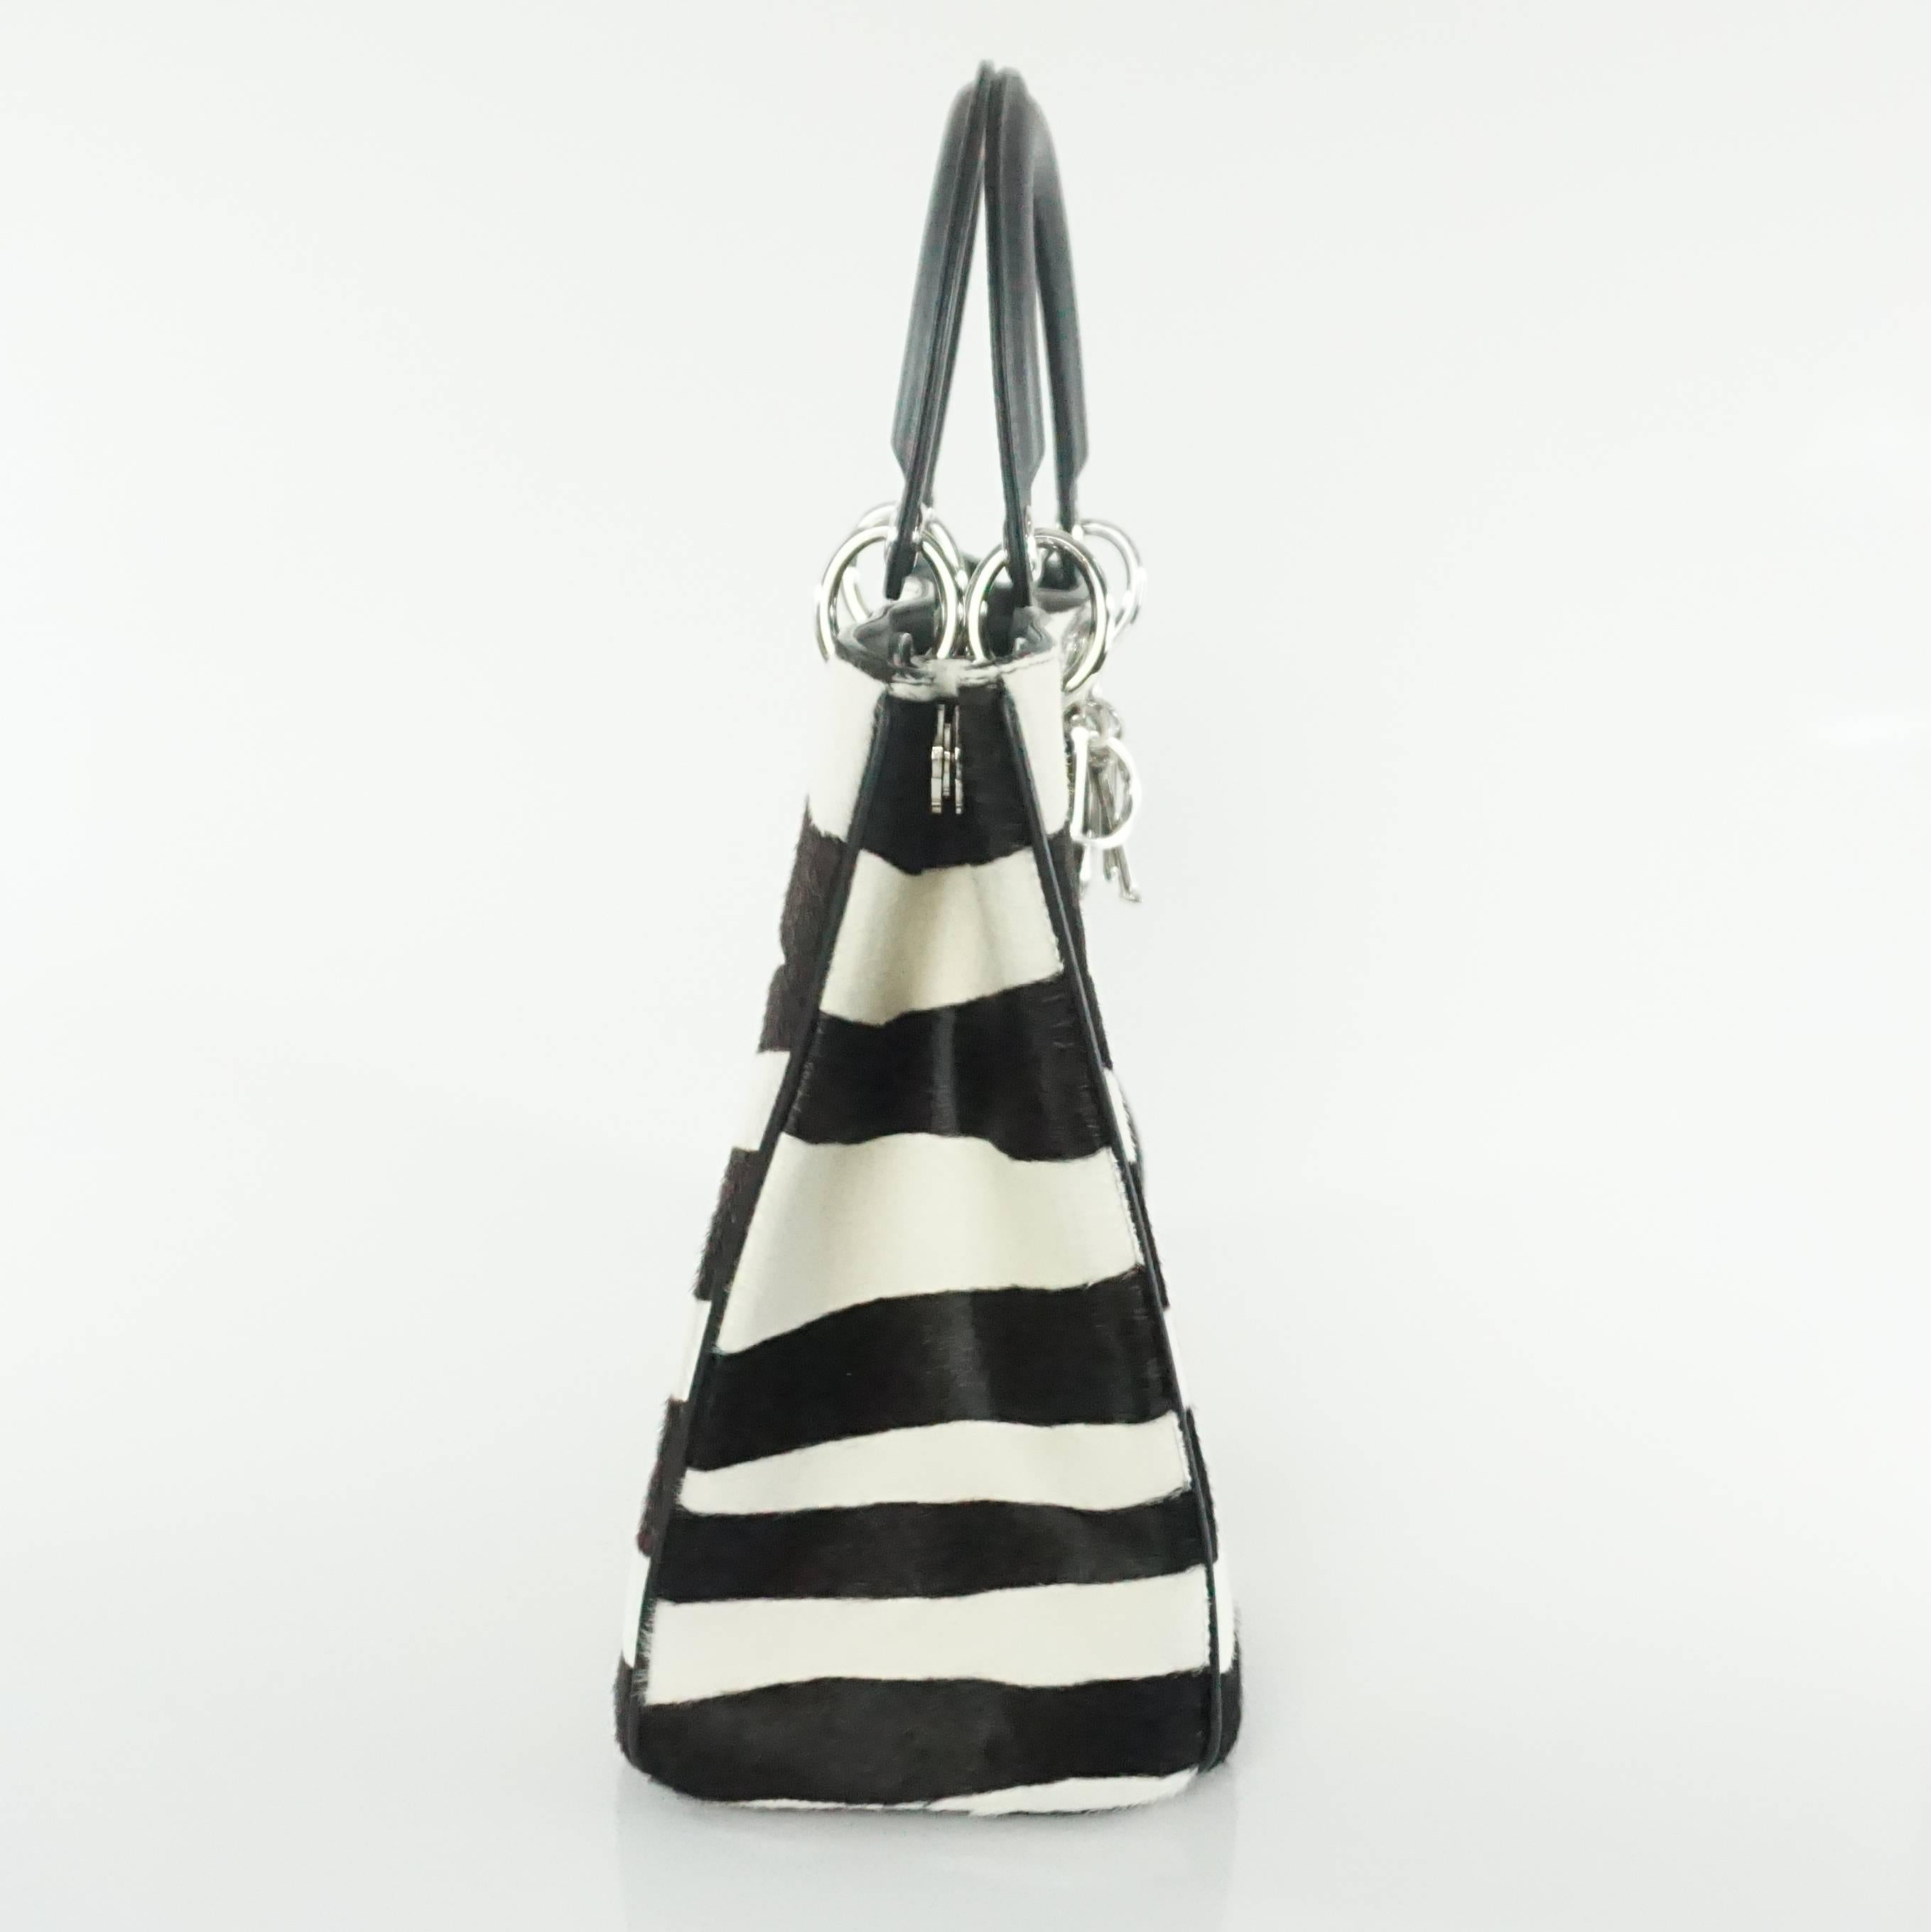 This Dior pony hair bag is a fabulous piece. It features a dark brown and ivory pony hair fabric, black leather handles and trim, and silver hardware with a hanging logo chain. The bag has a black leather lining and comes with a small black case,